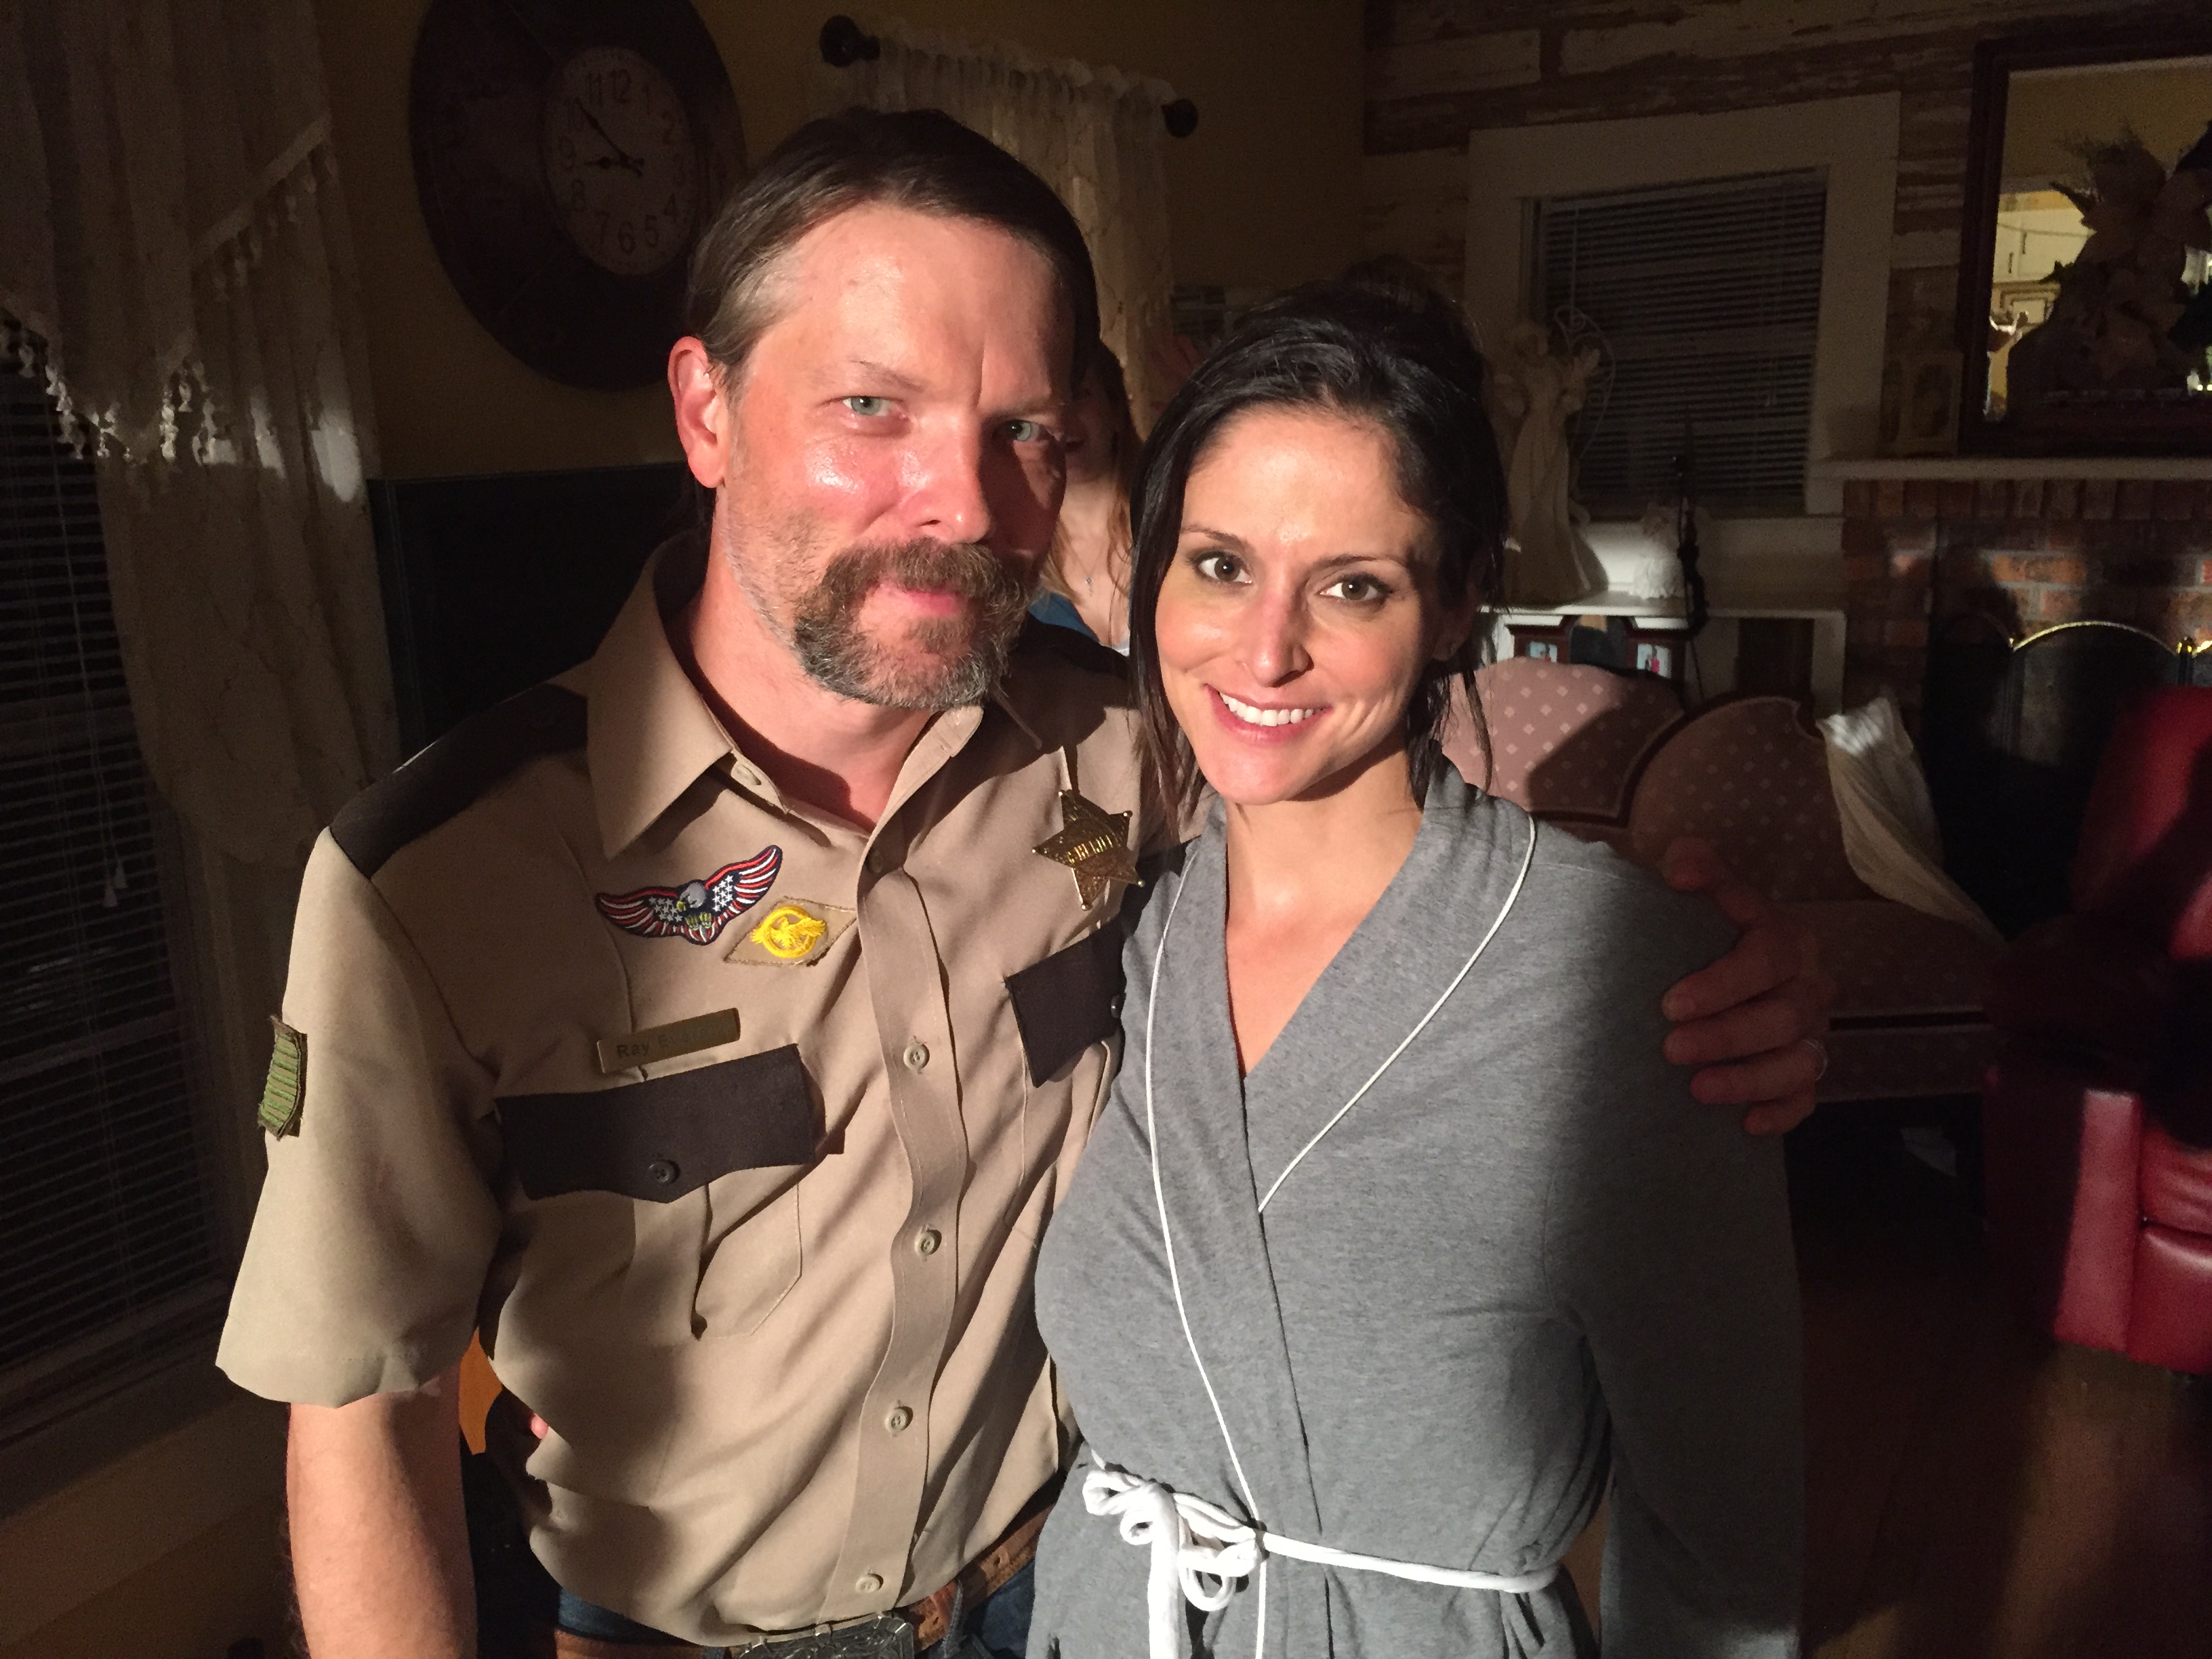 Candice Barley and Miles Doleac on the set of The Hollow